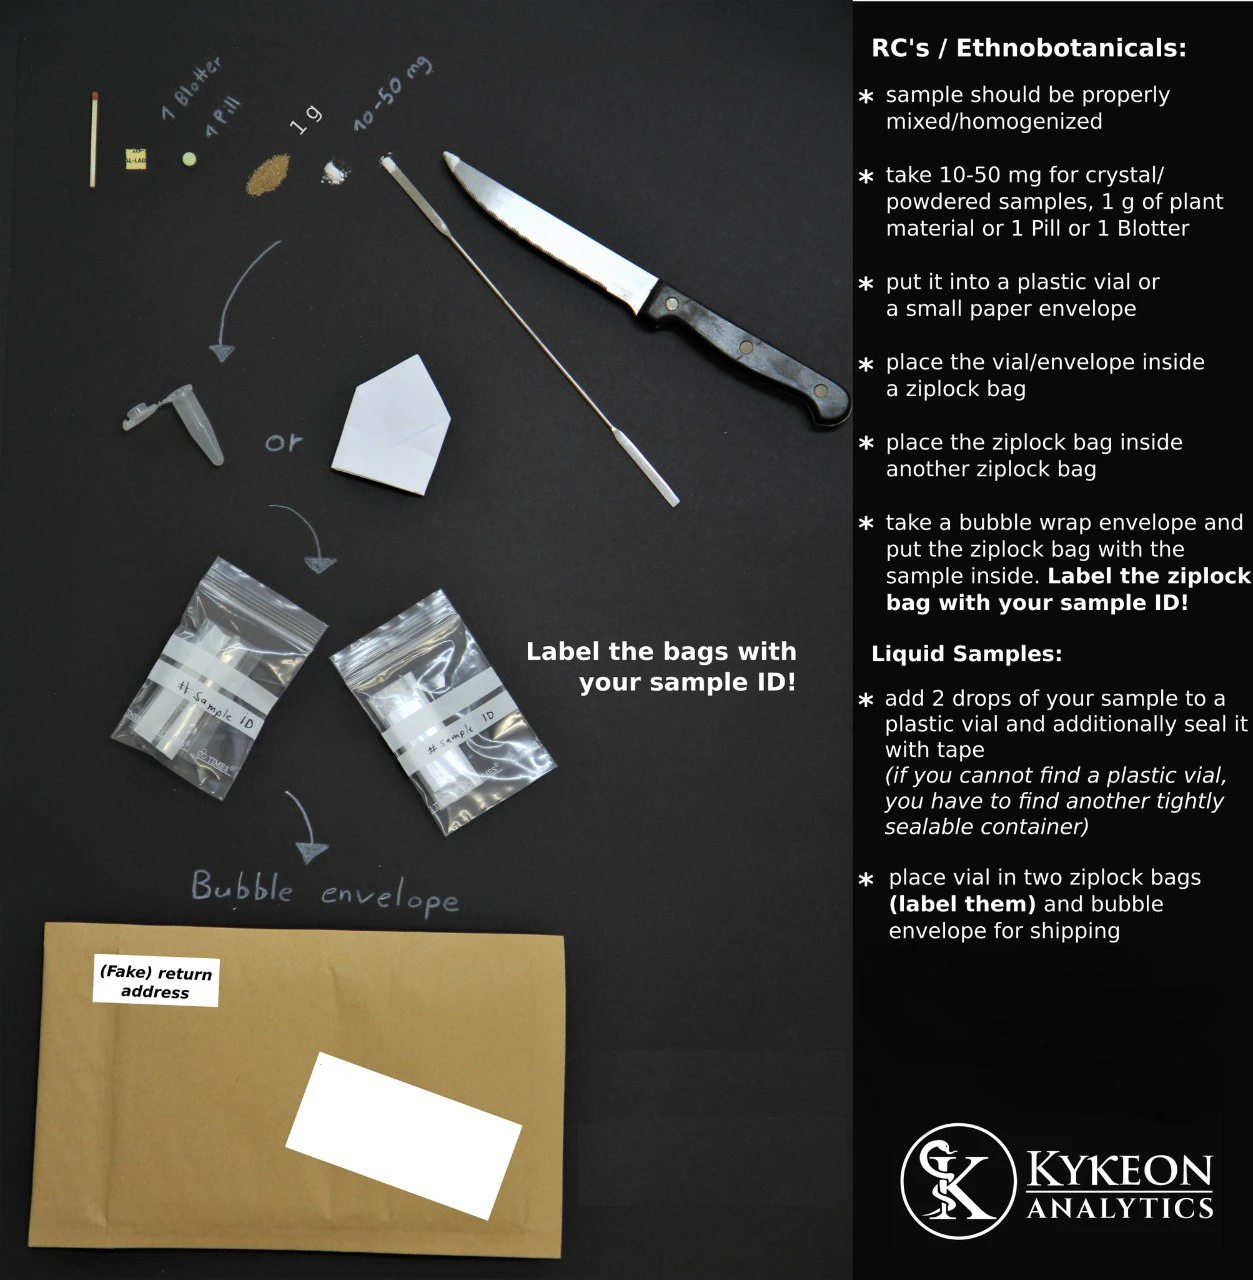 Sample preparation and shipping guide.